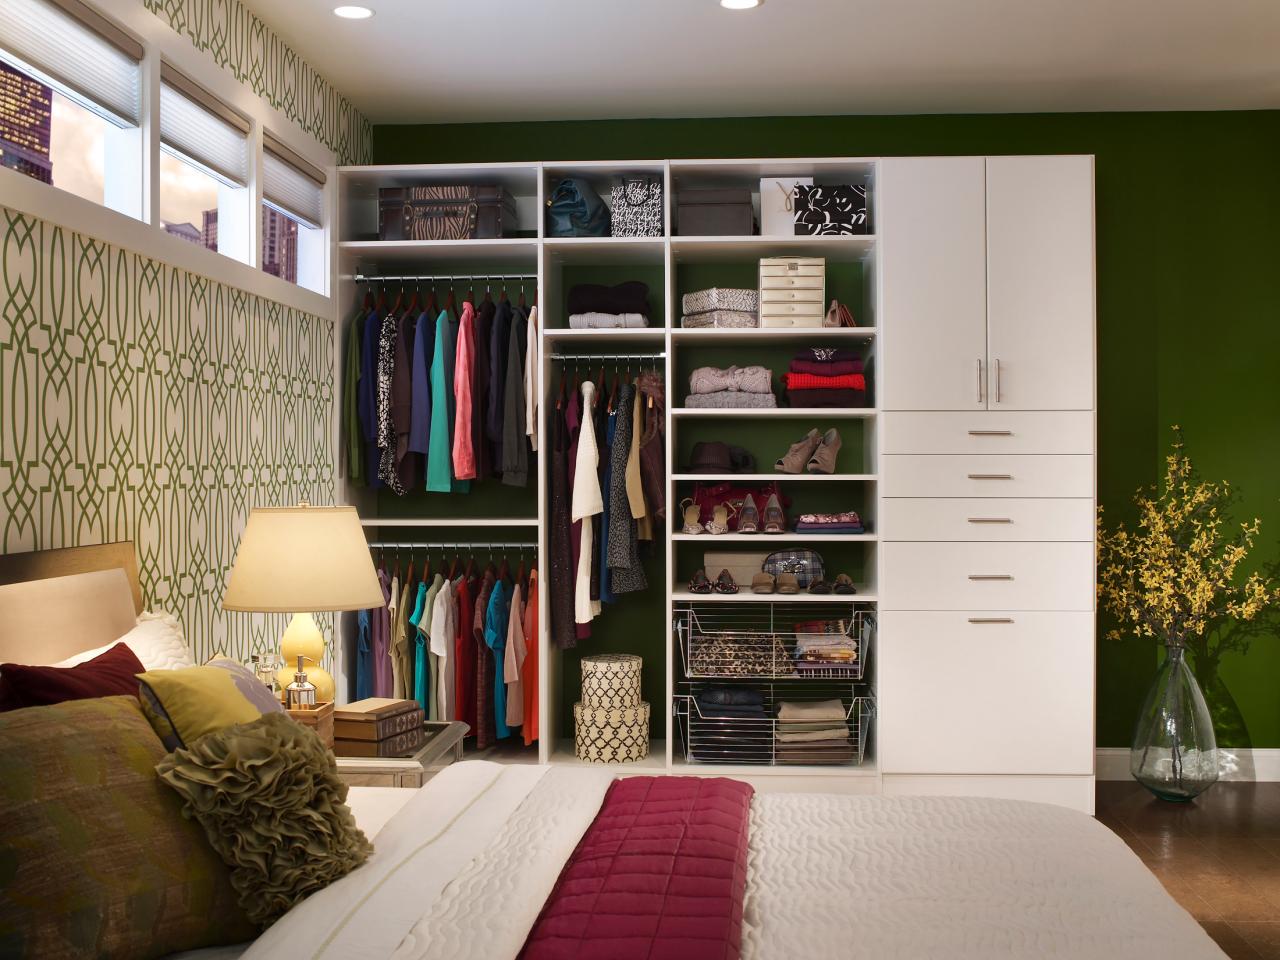 5 Steps To Organizing Your Closet, Bedroom Wall Shelves For Clothes